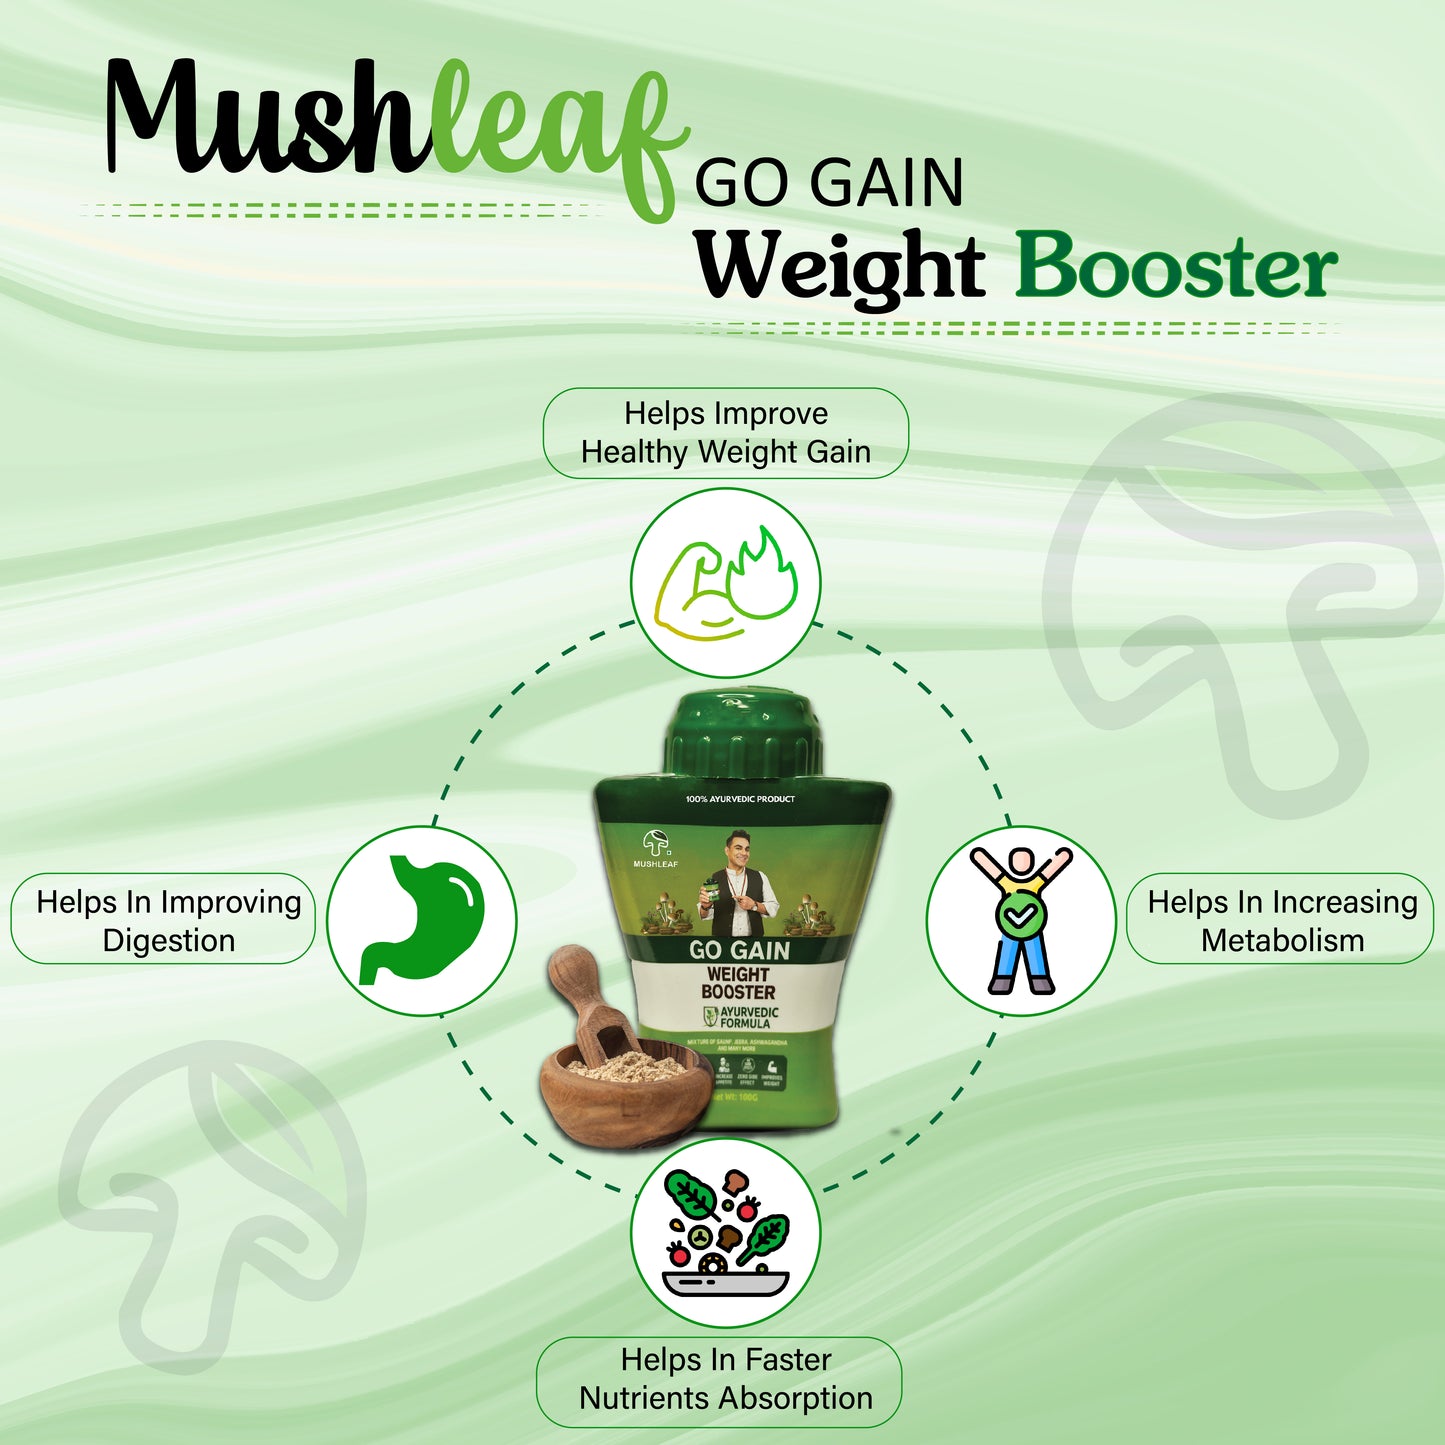 Mushleaf Go Gain Weight Booster